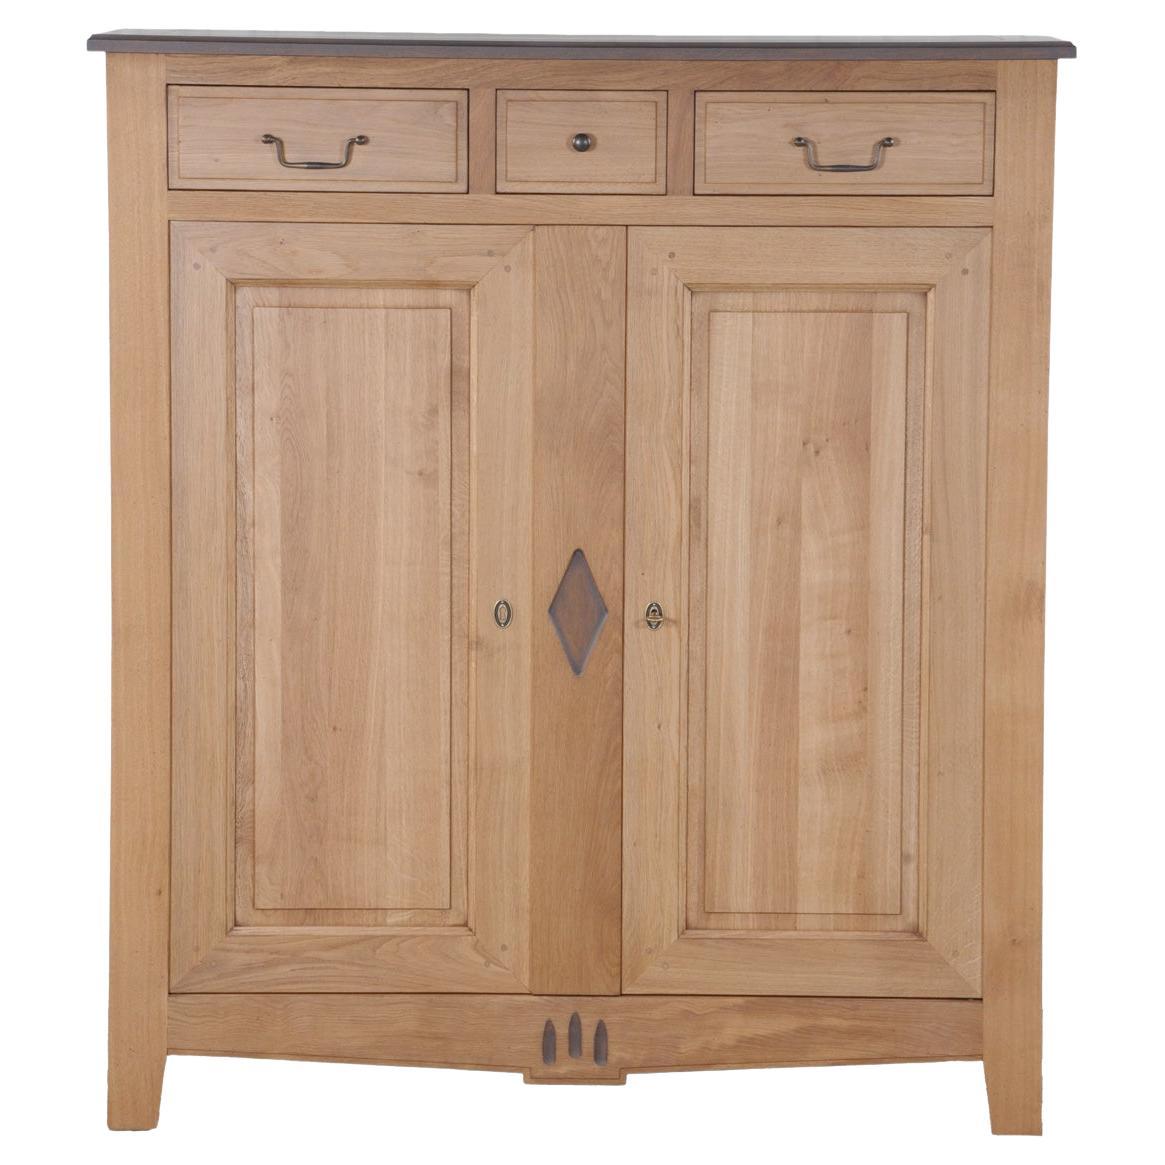 2-door 3-drawer Cabinet in solid oak, a French Directoire style interpretation